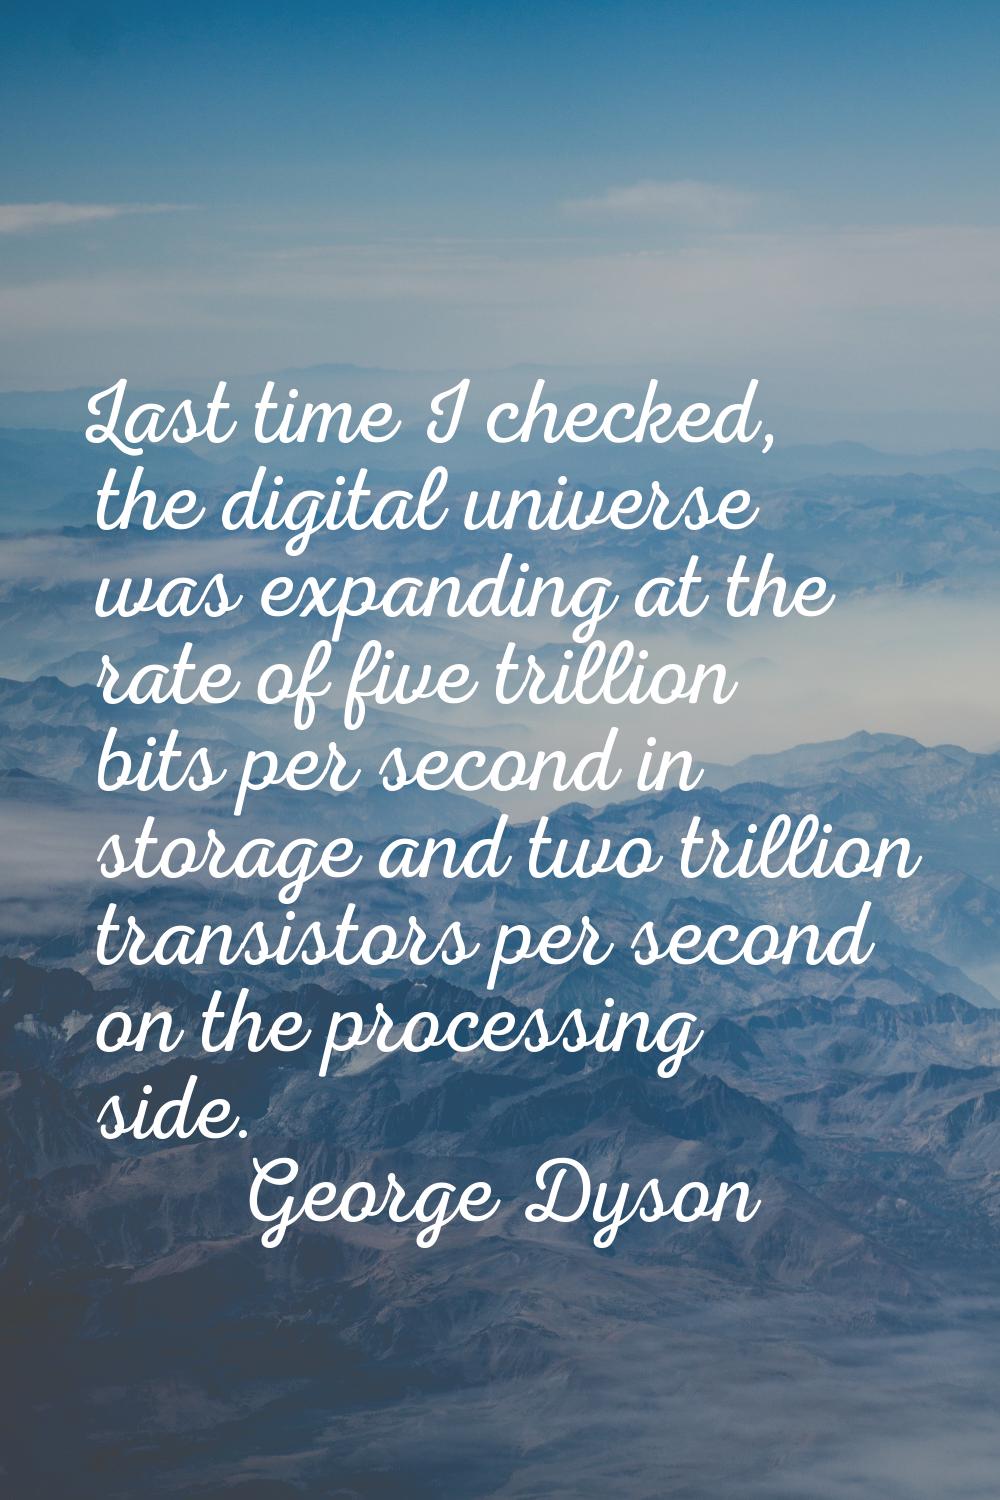 Last time I checked, the digital universe was expanding at the rate of five trillion bits per secon